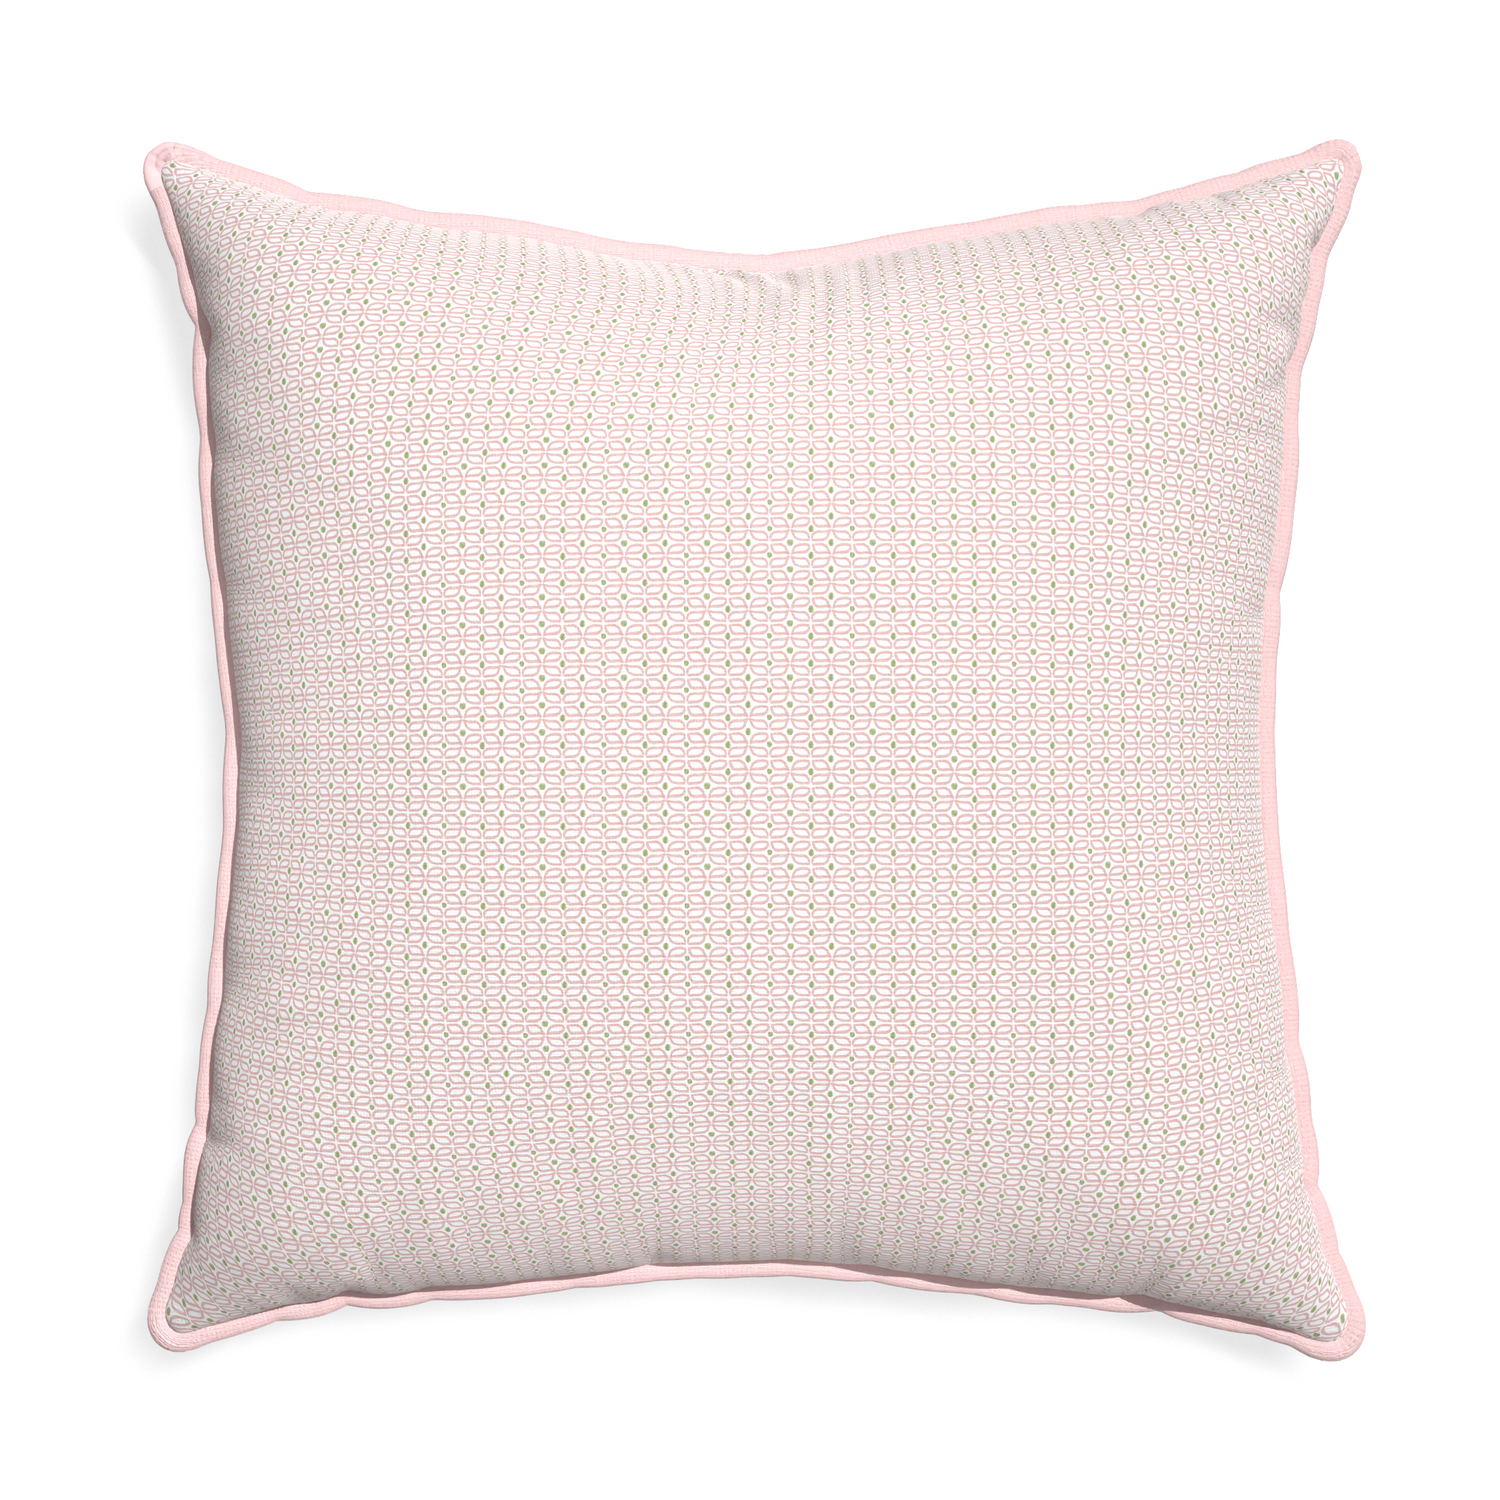 Euro-sham loomi pink custom pink geometricpillow with petal piping on white background